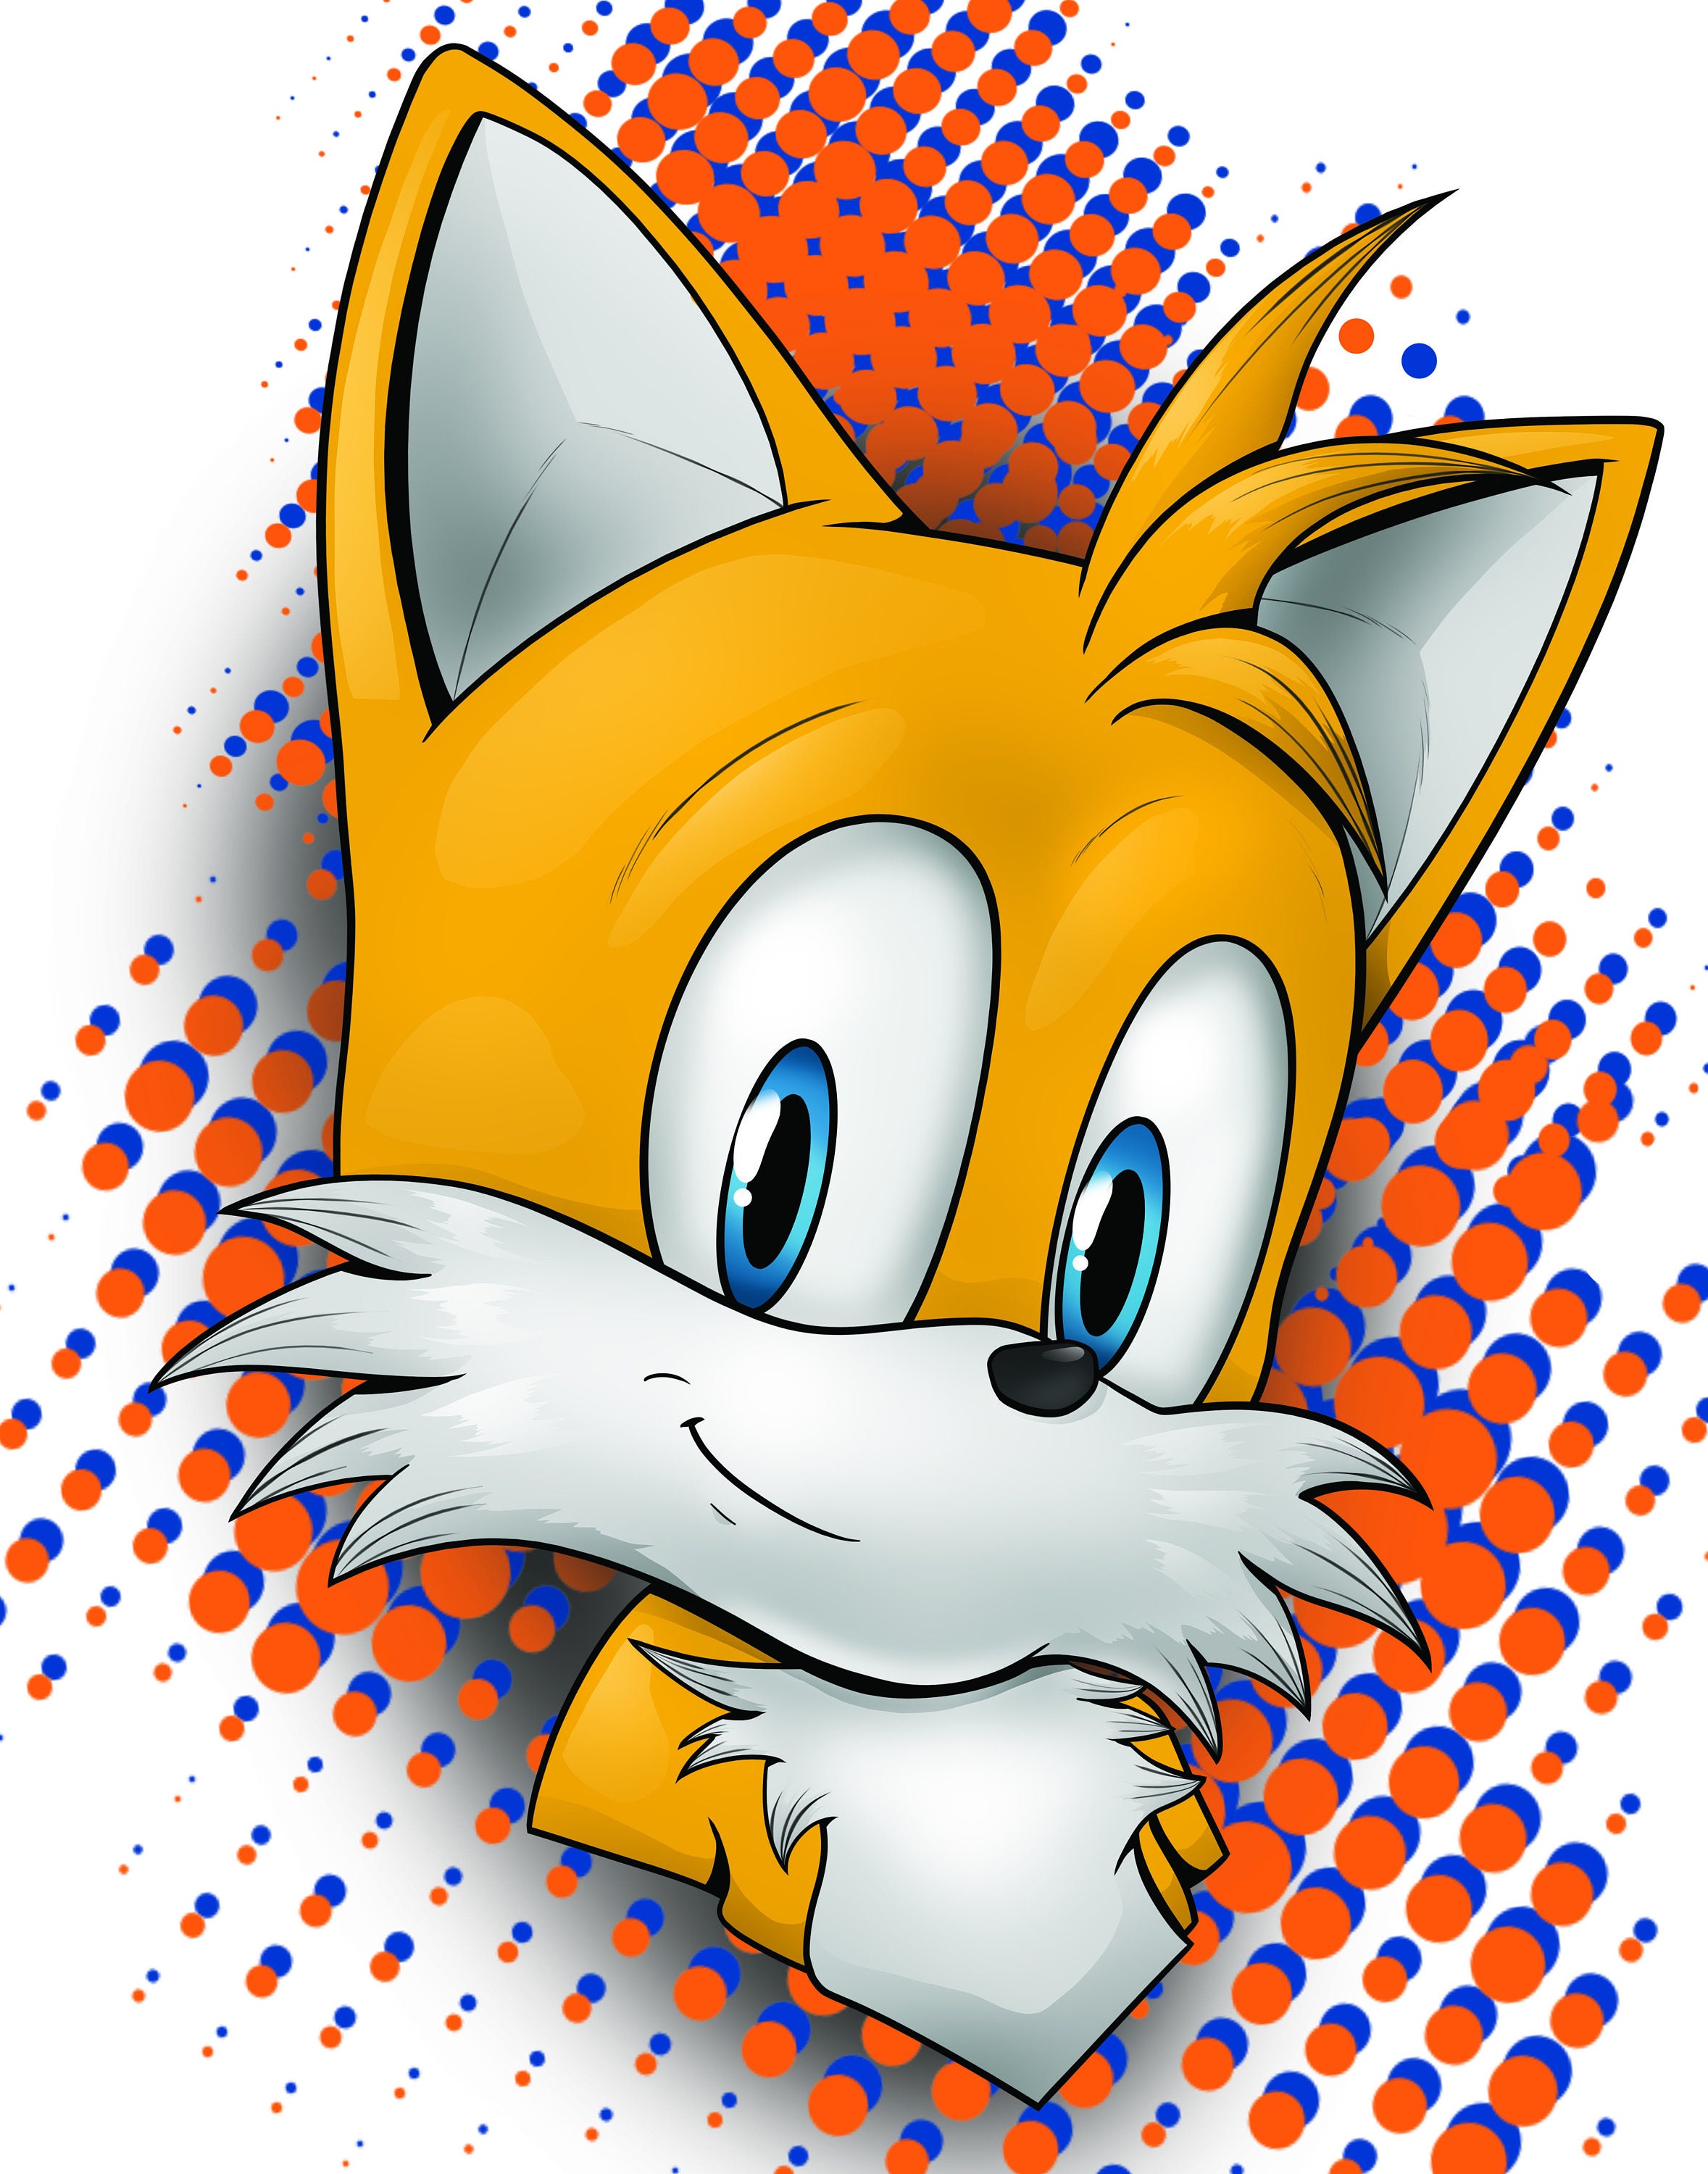 Tails Doll, an art print by Zephyr - INPRNT